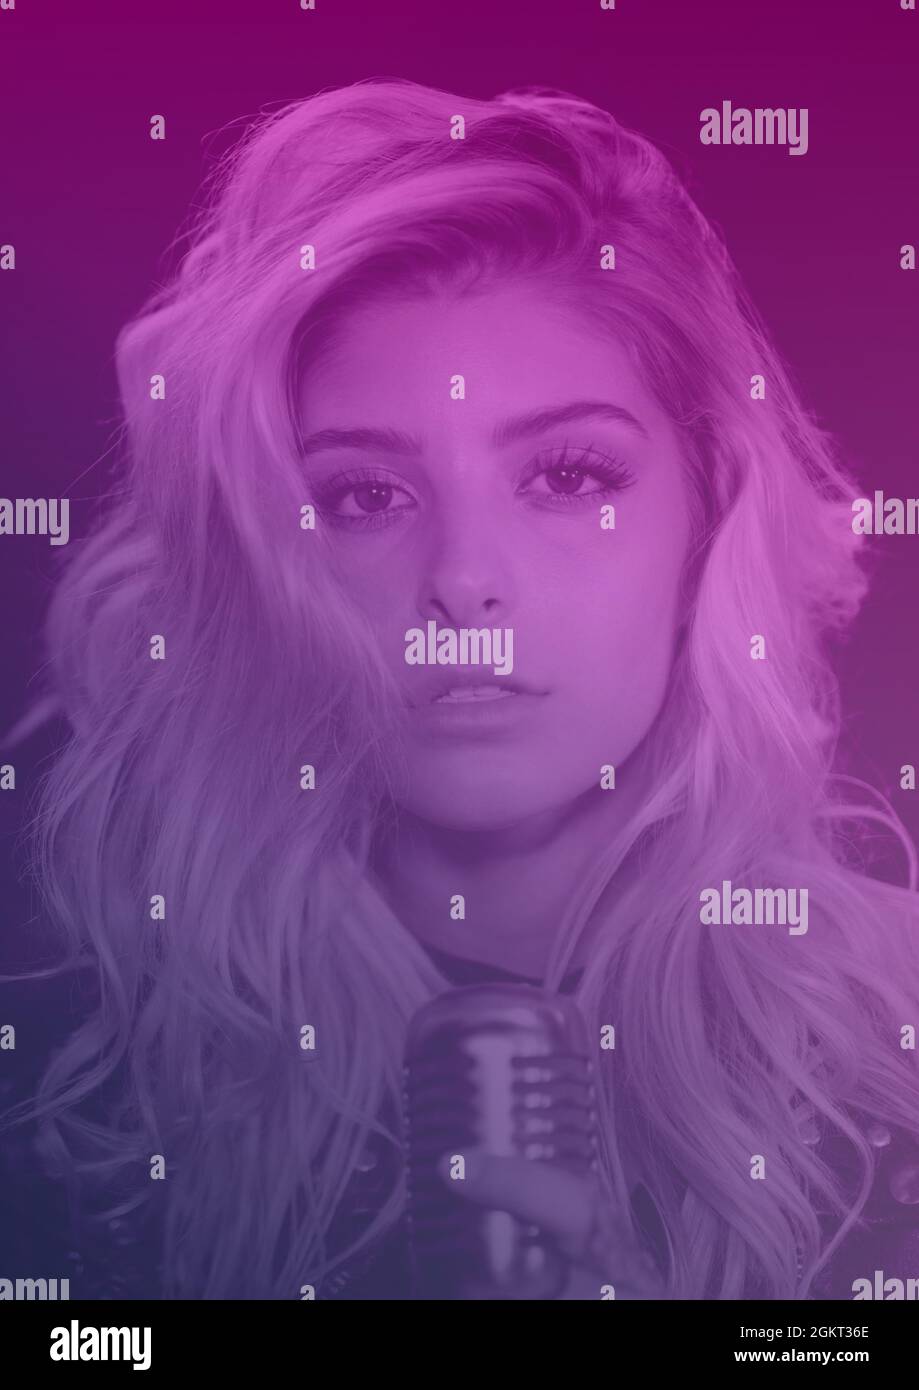 Portrait of caucasian female singer holding a microphone against purple background Stock Photo